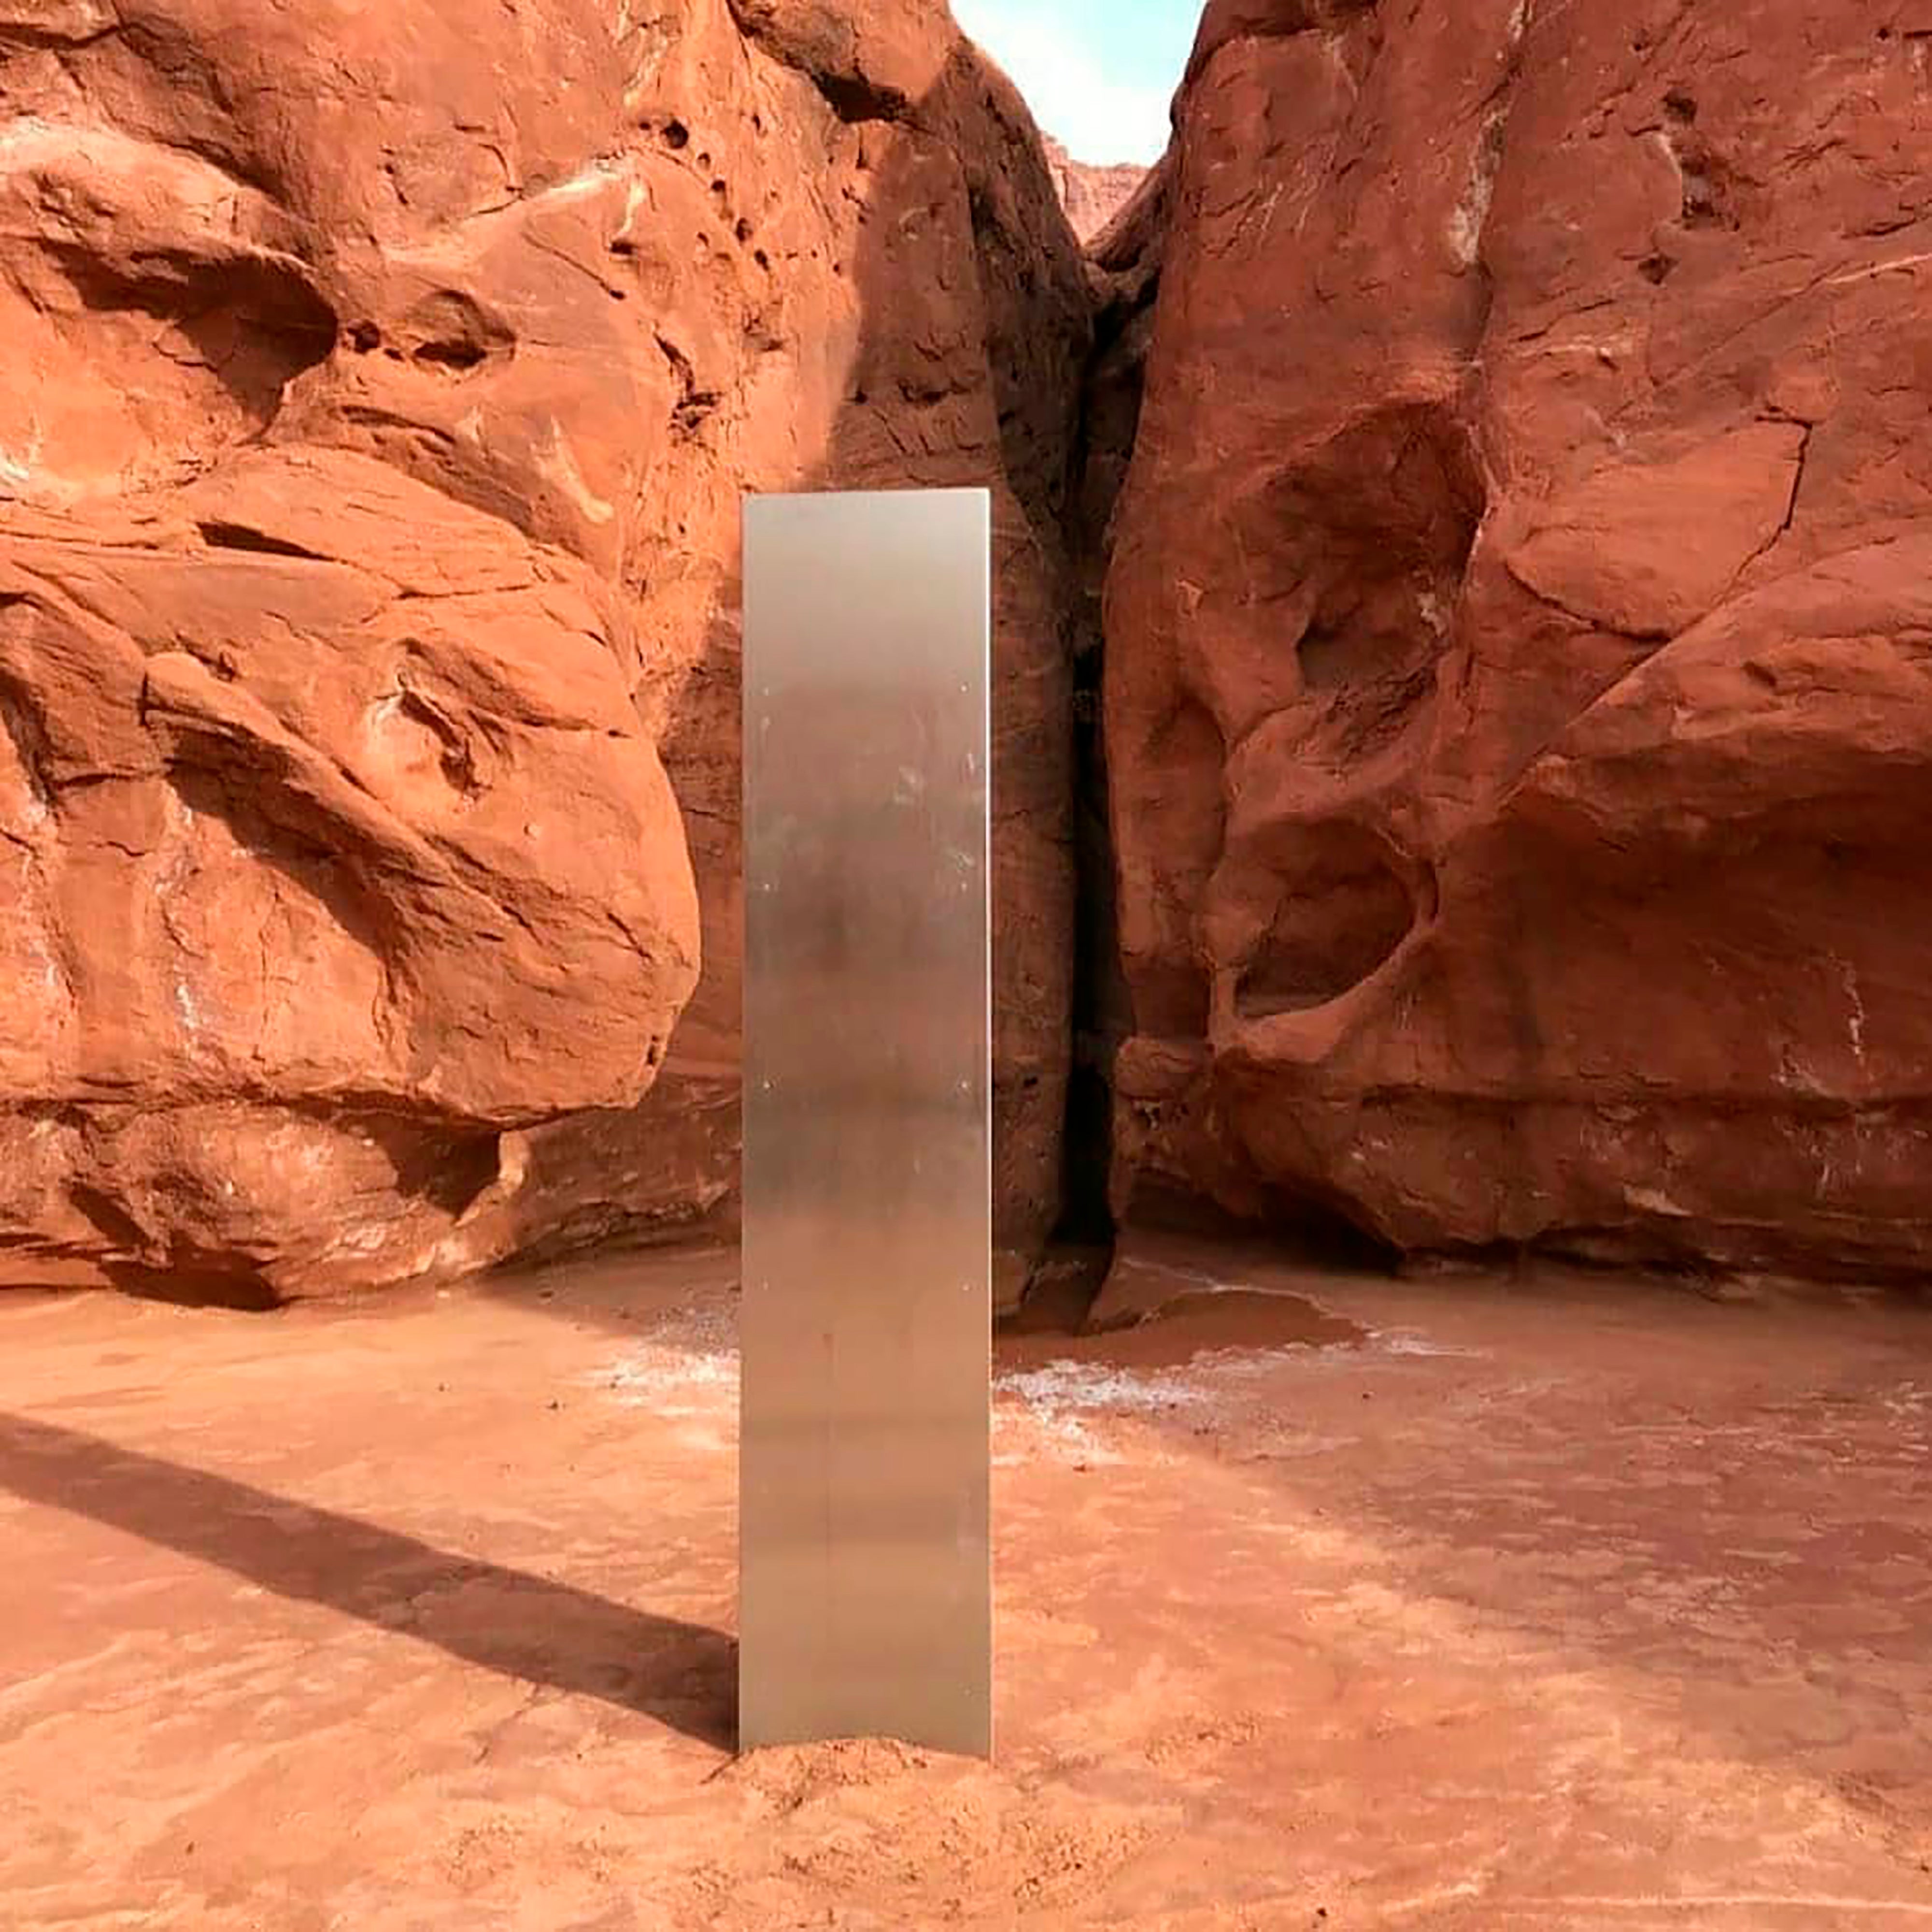 Utah monolith First people find mysterious object after frenzy of online sleuthing The Independent image